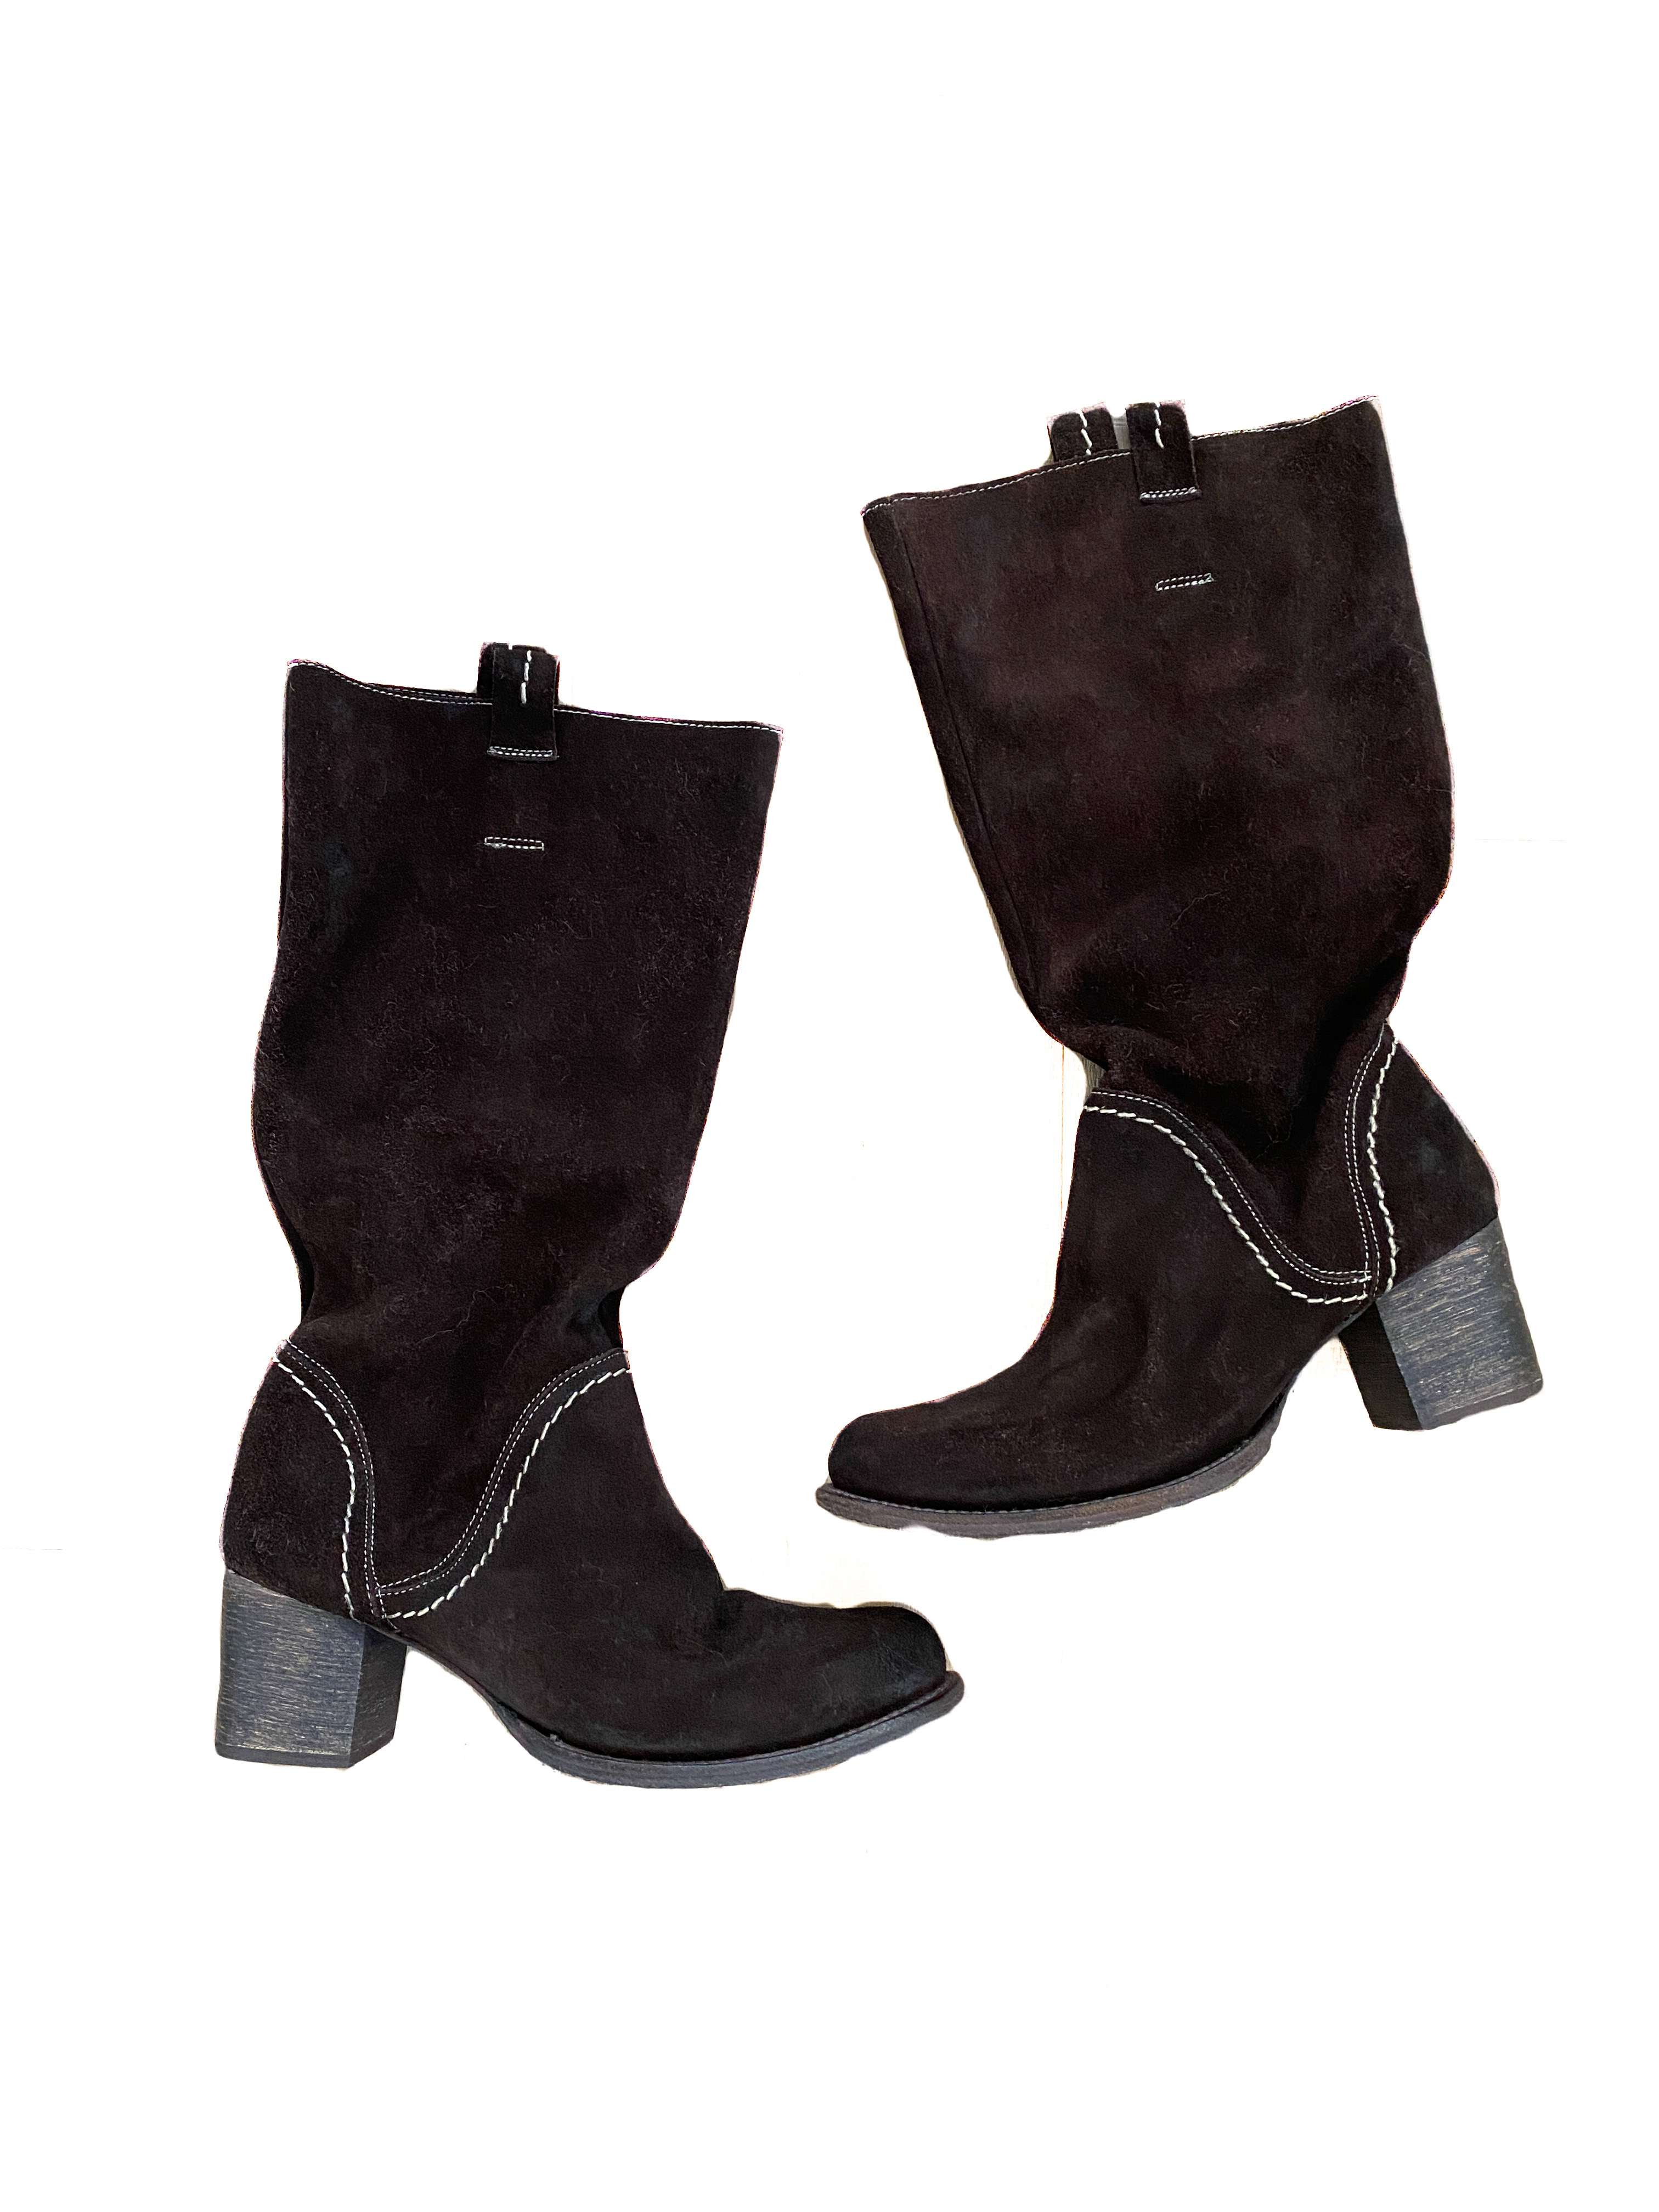 A pair of slouchy brown suede boots with white stitching and about a 2 inch heel are silhouetted against a white background with text alongside them.